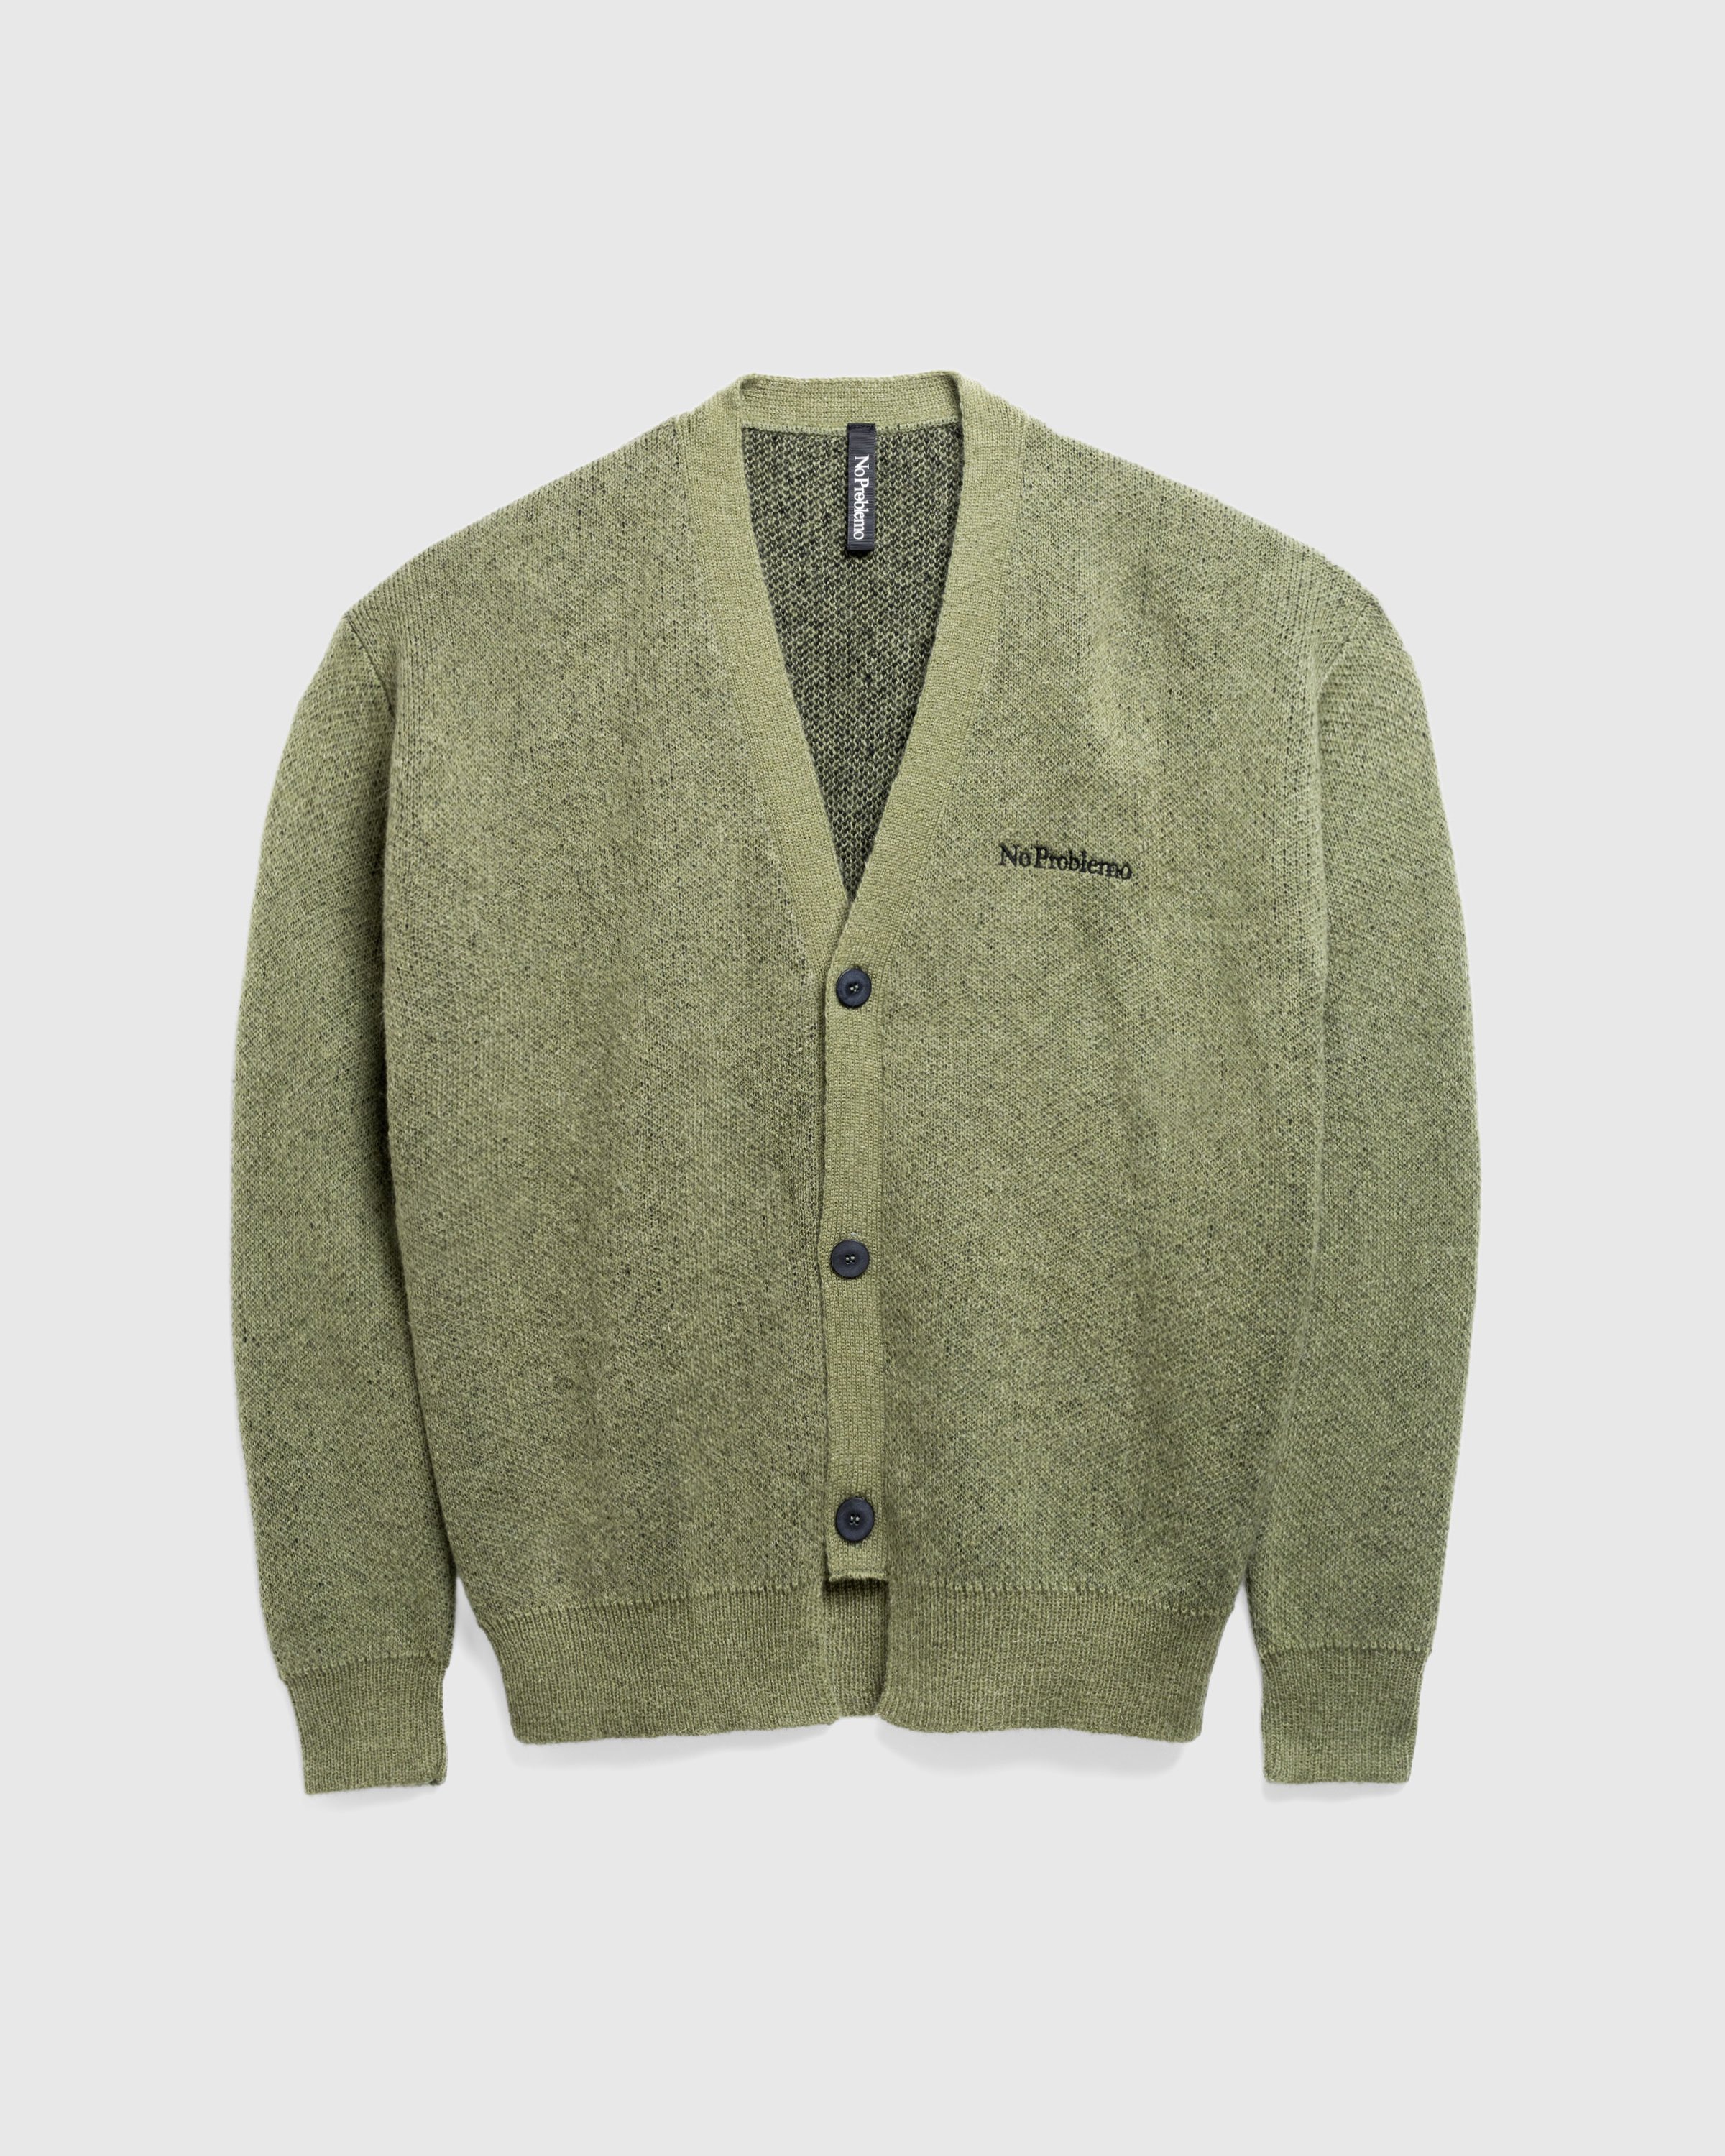 Aries - No Problemo Brushed Mohair Cardigan Black/Olive - Clothing - Green - Image 1